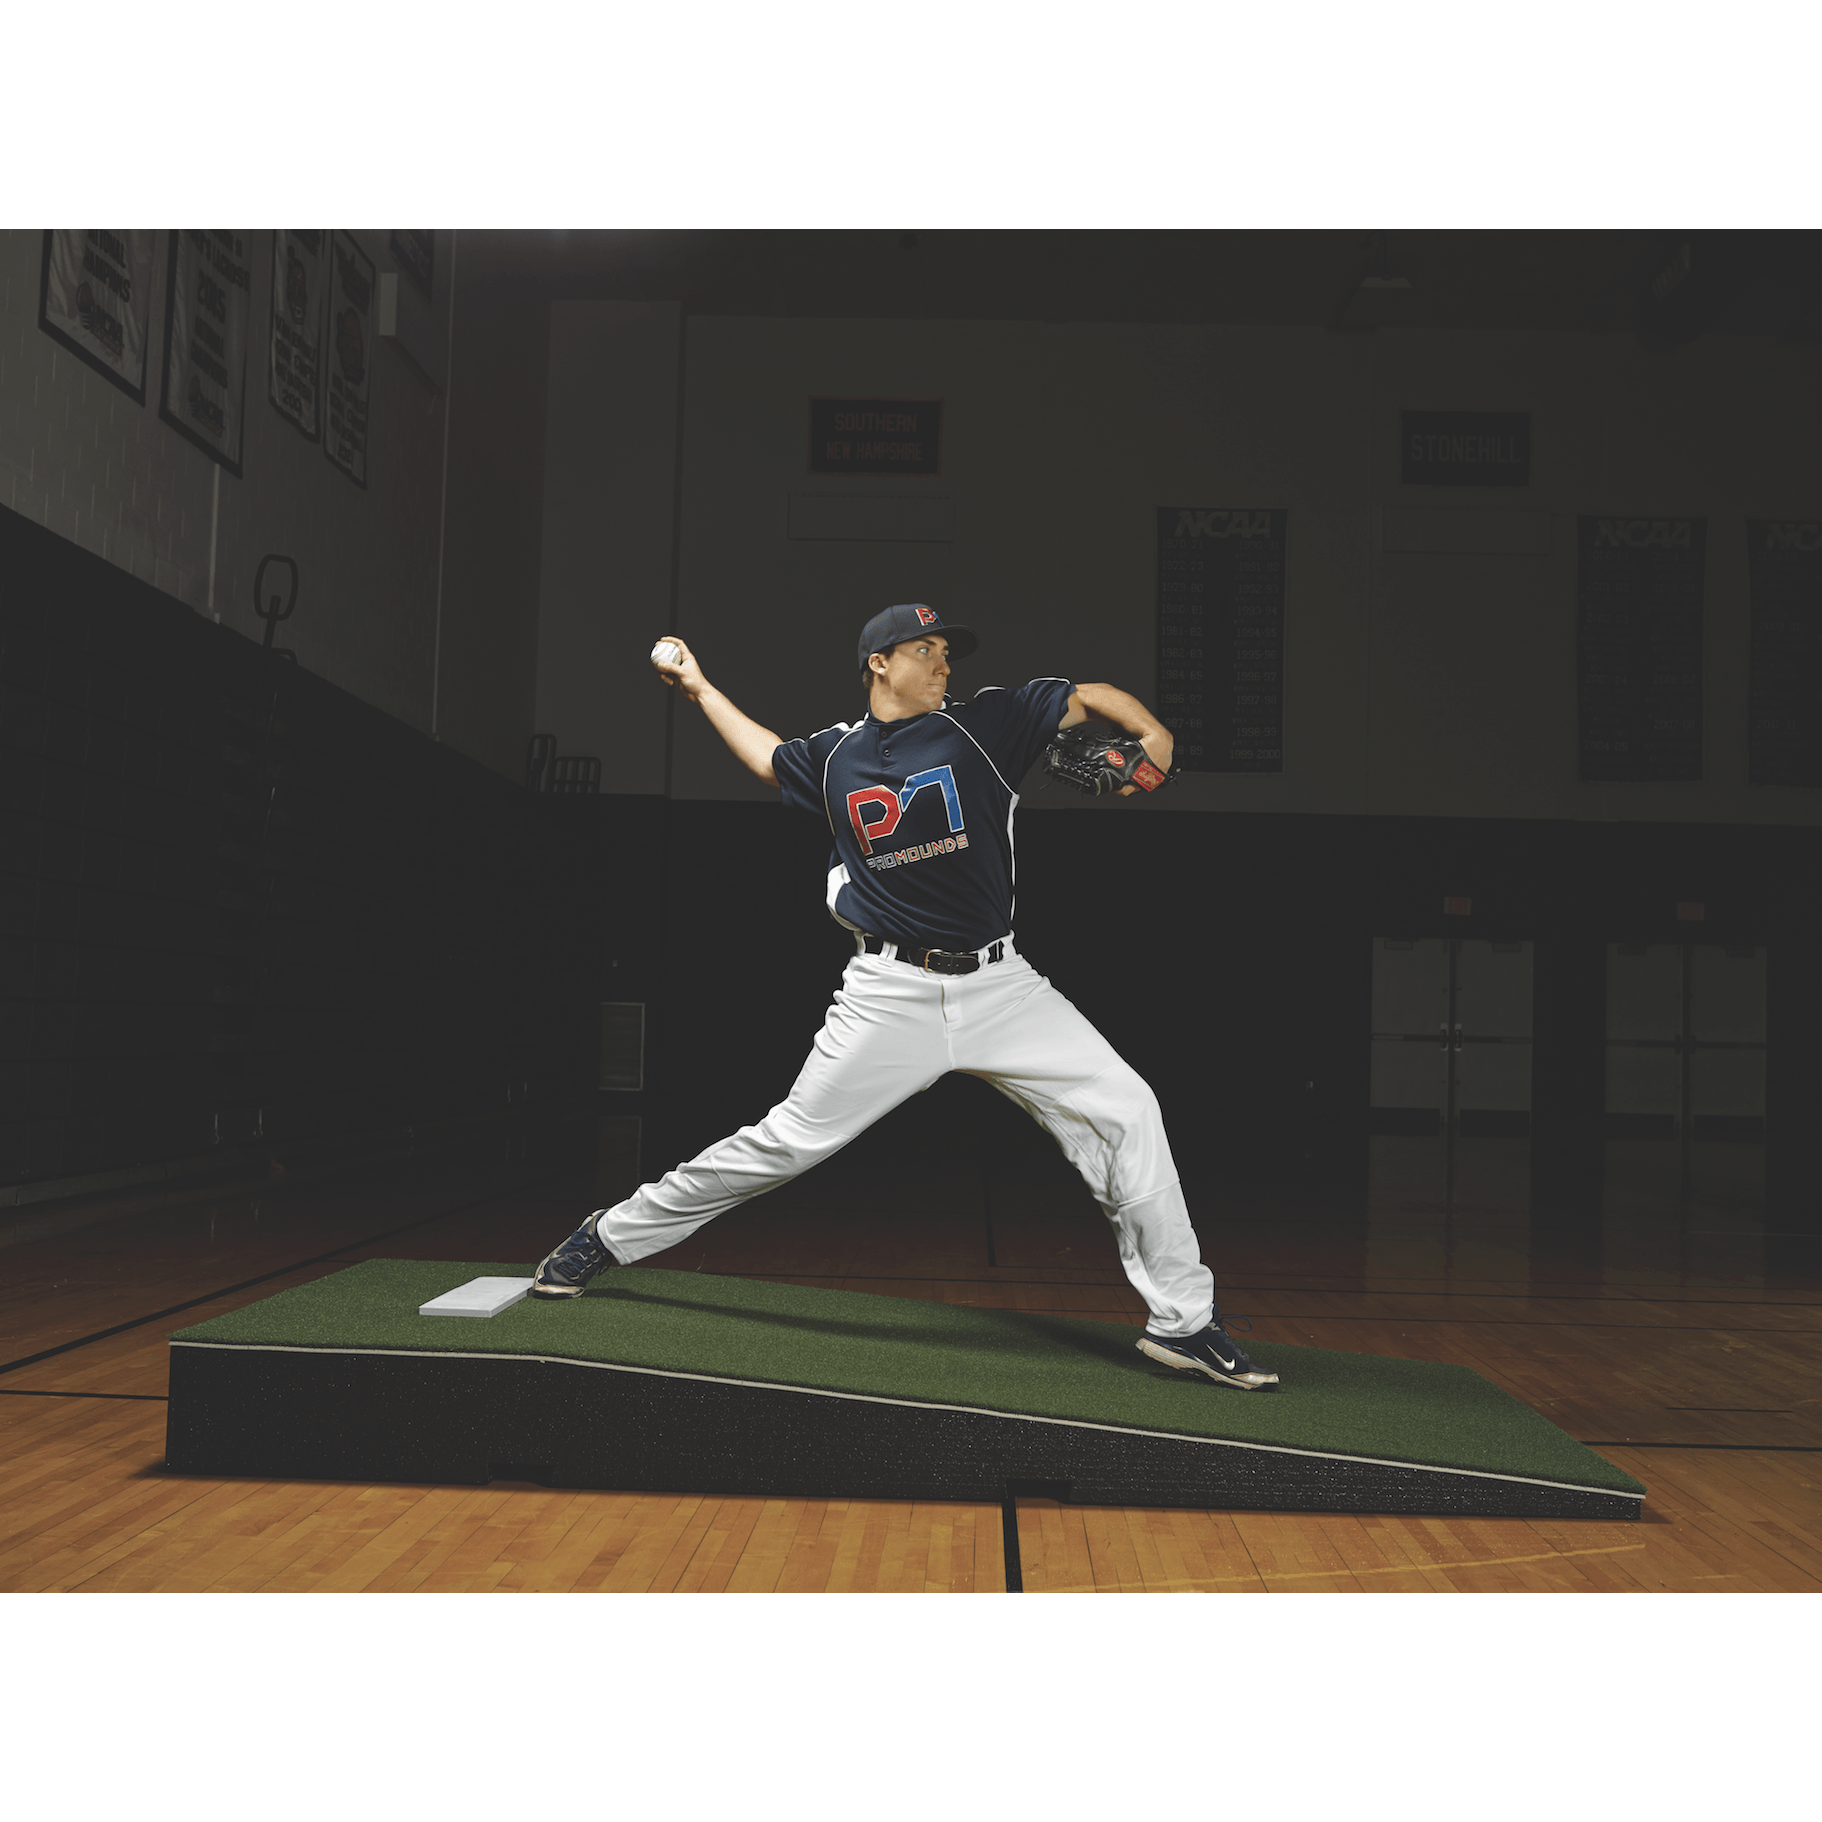 ProMounds Portable ProModel Practice Pitching Mound - Pitch Pro Direct